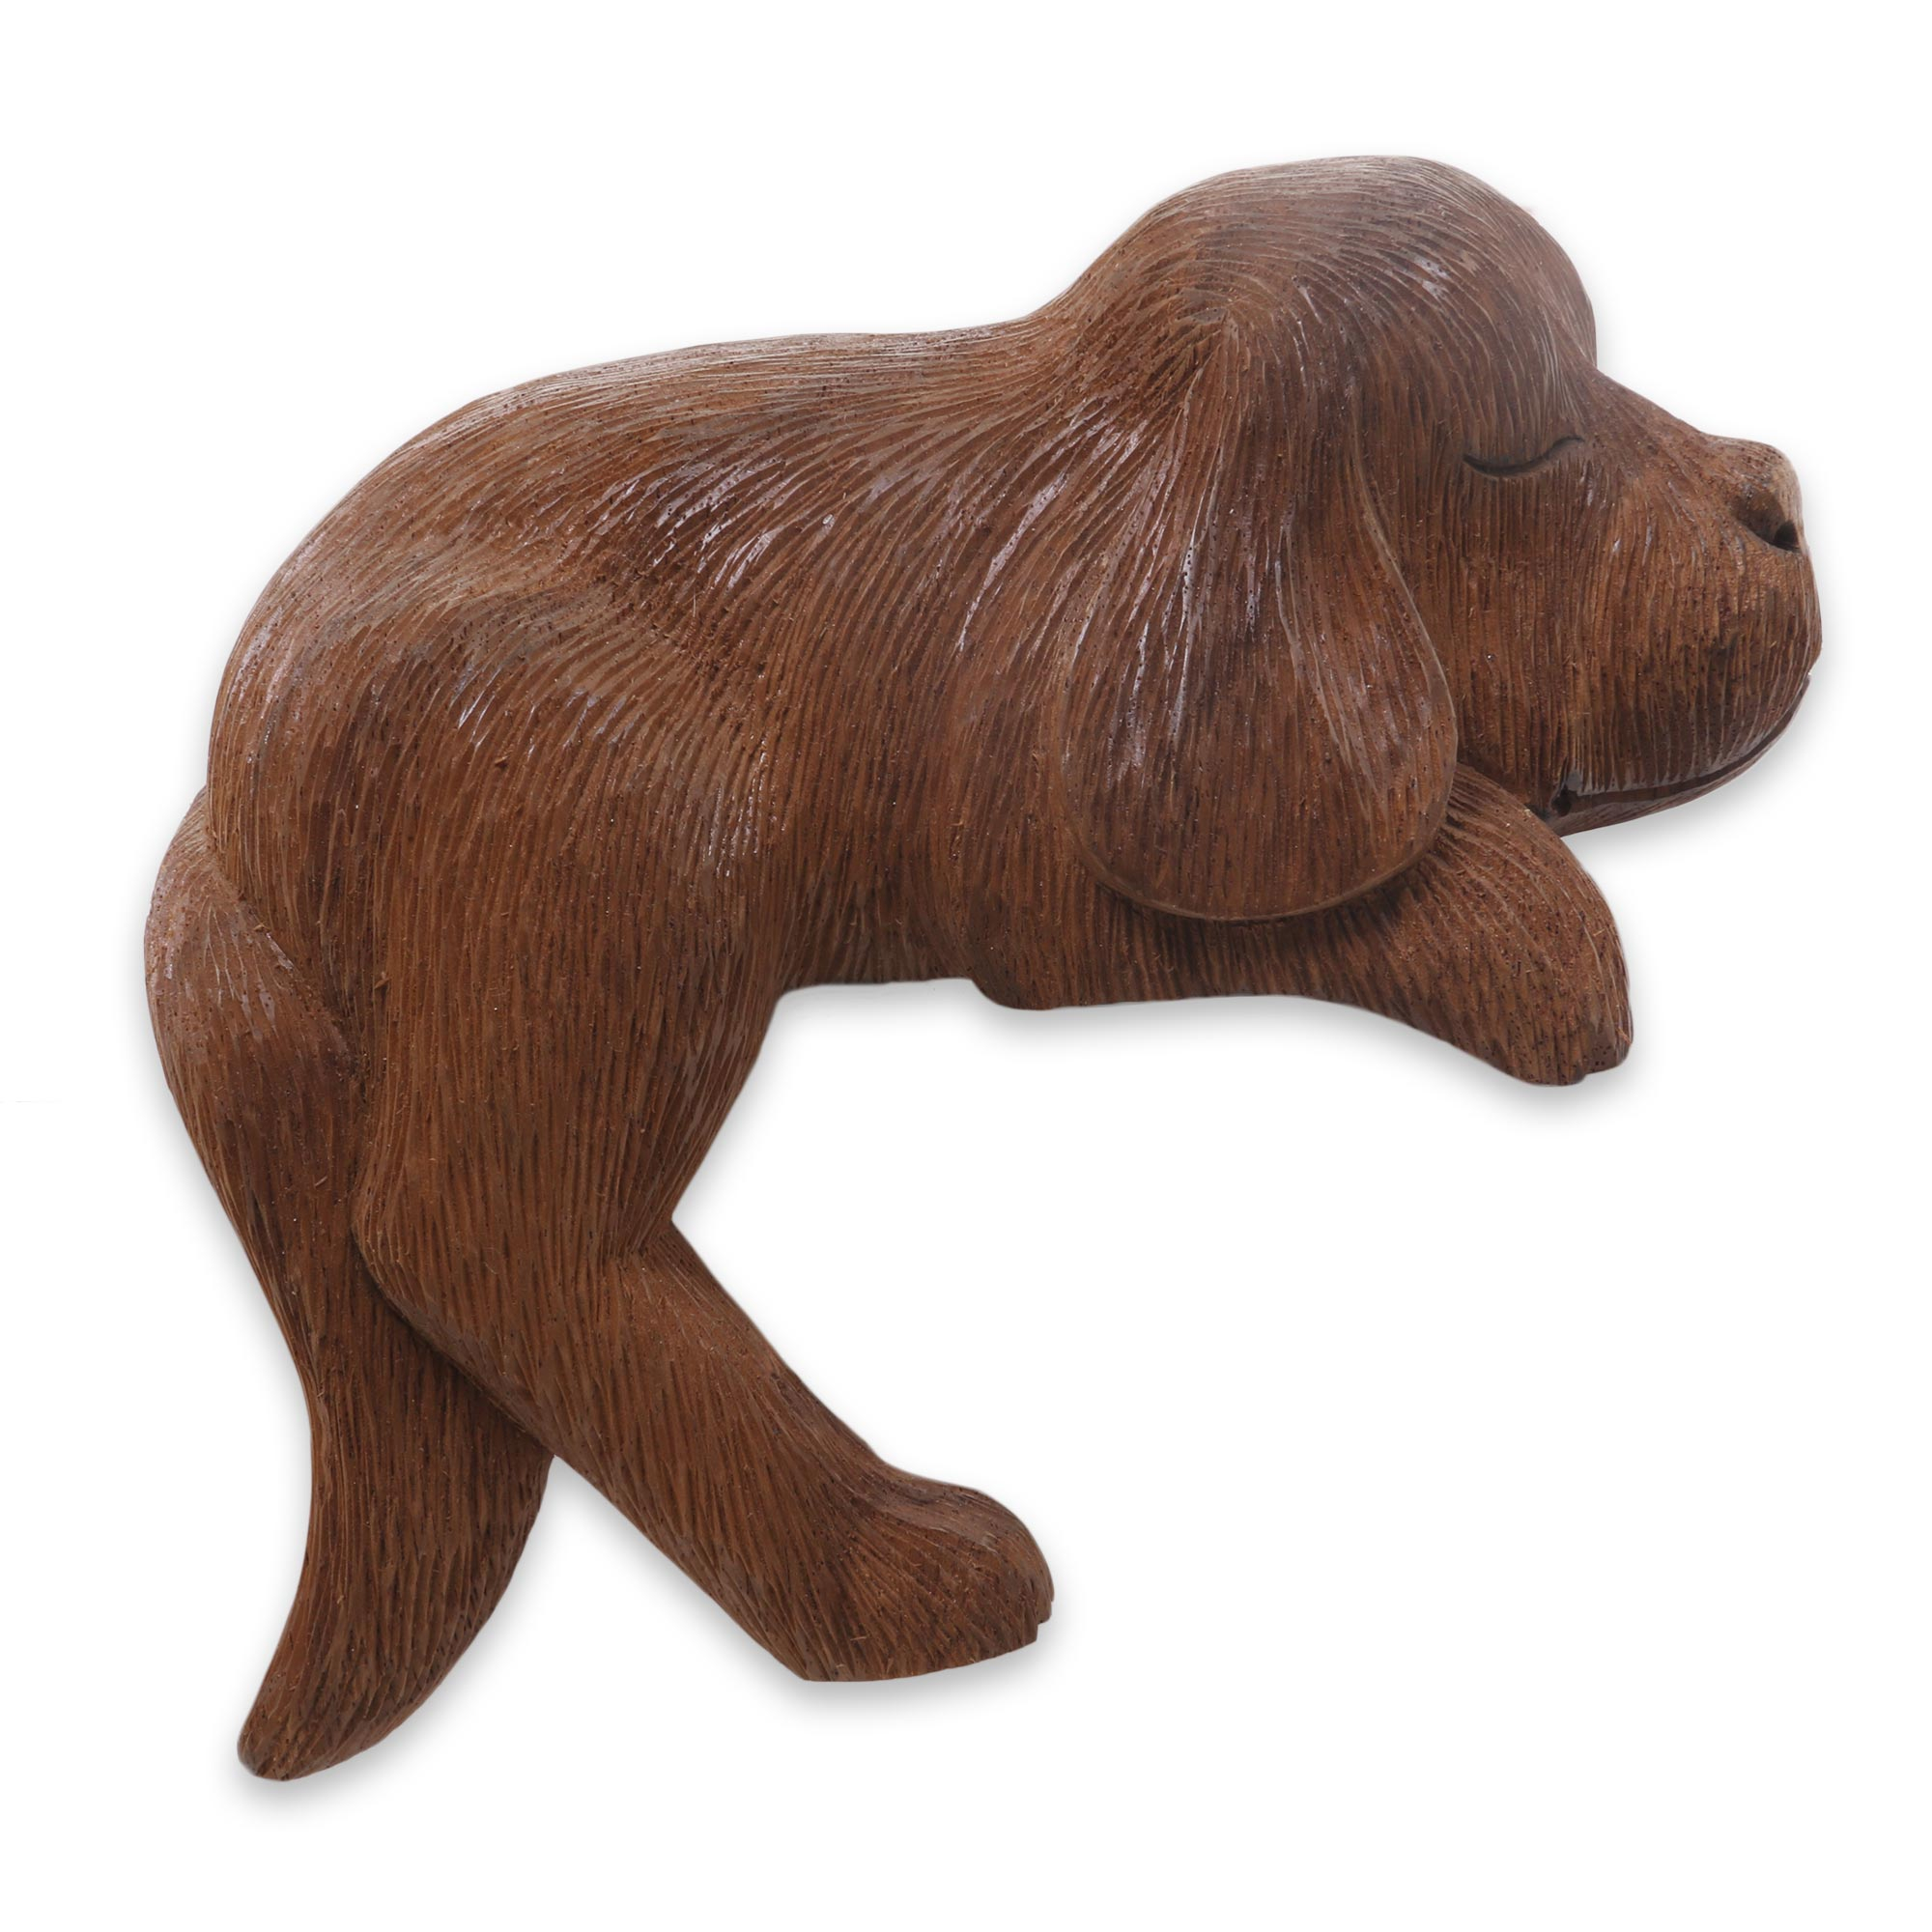 Sleepy Cocker Spaniel Puppy Sculpture Hand Carved in Wood - Long-Haired ...